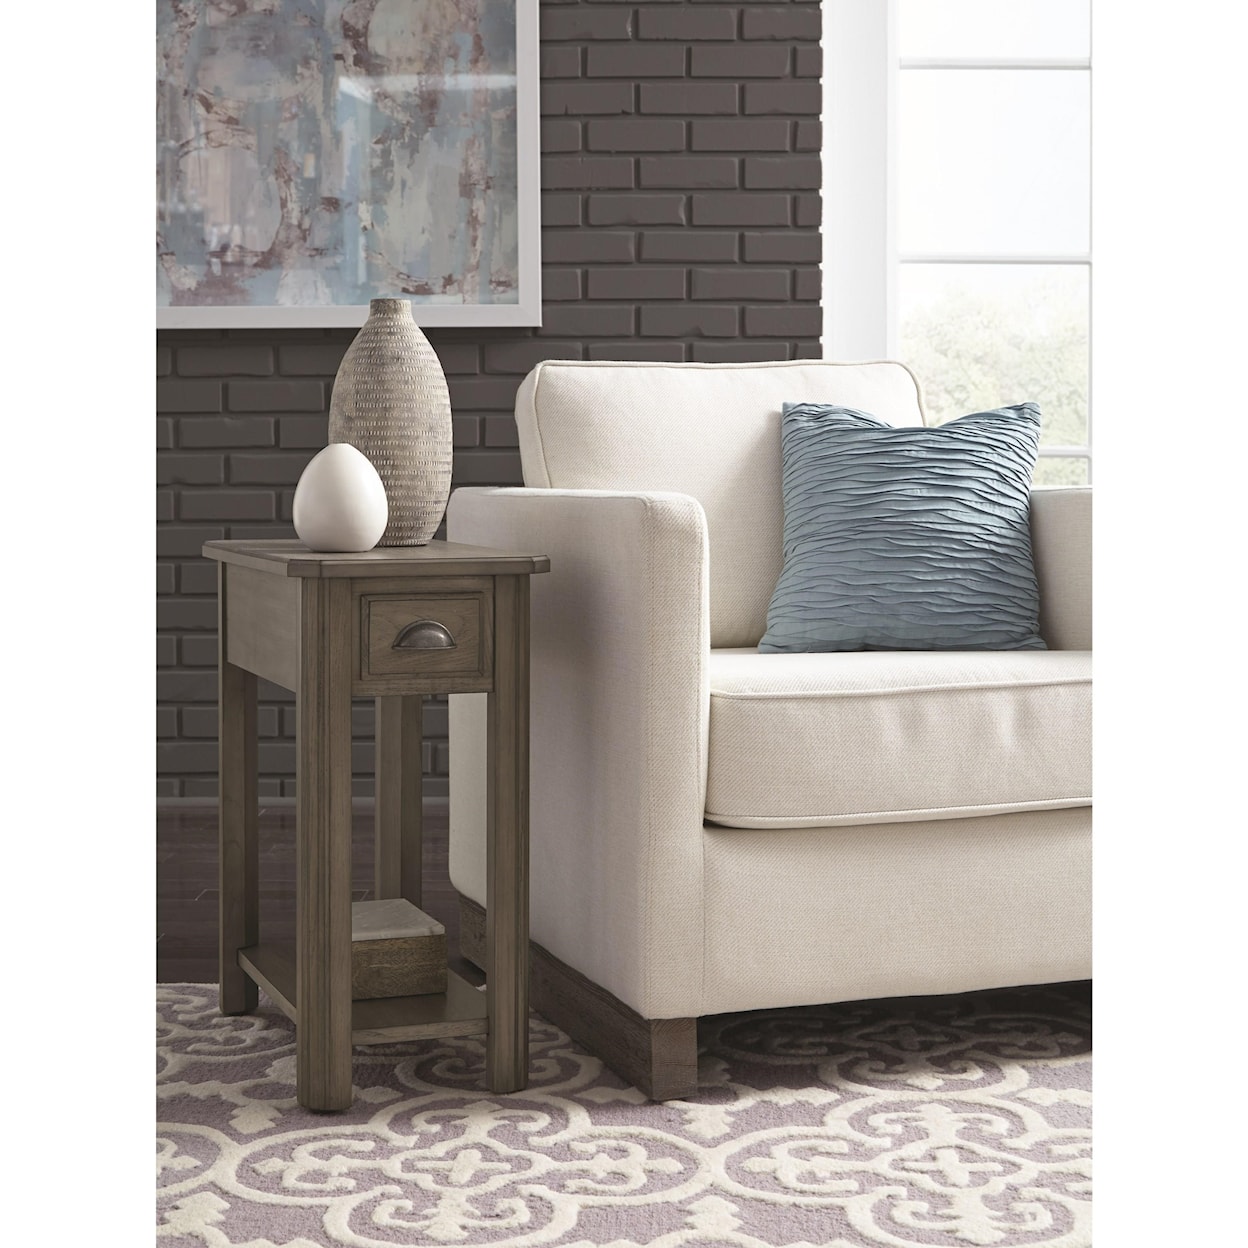 Null Furniture 2114 Chairside End Table